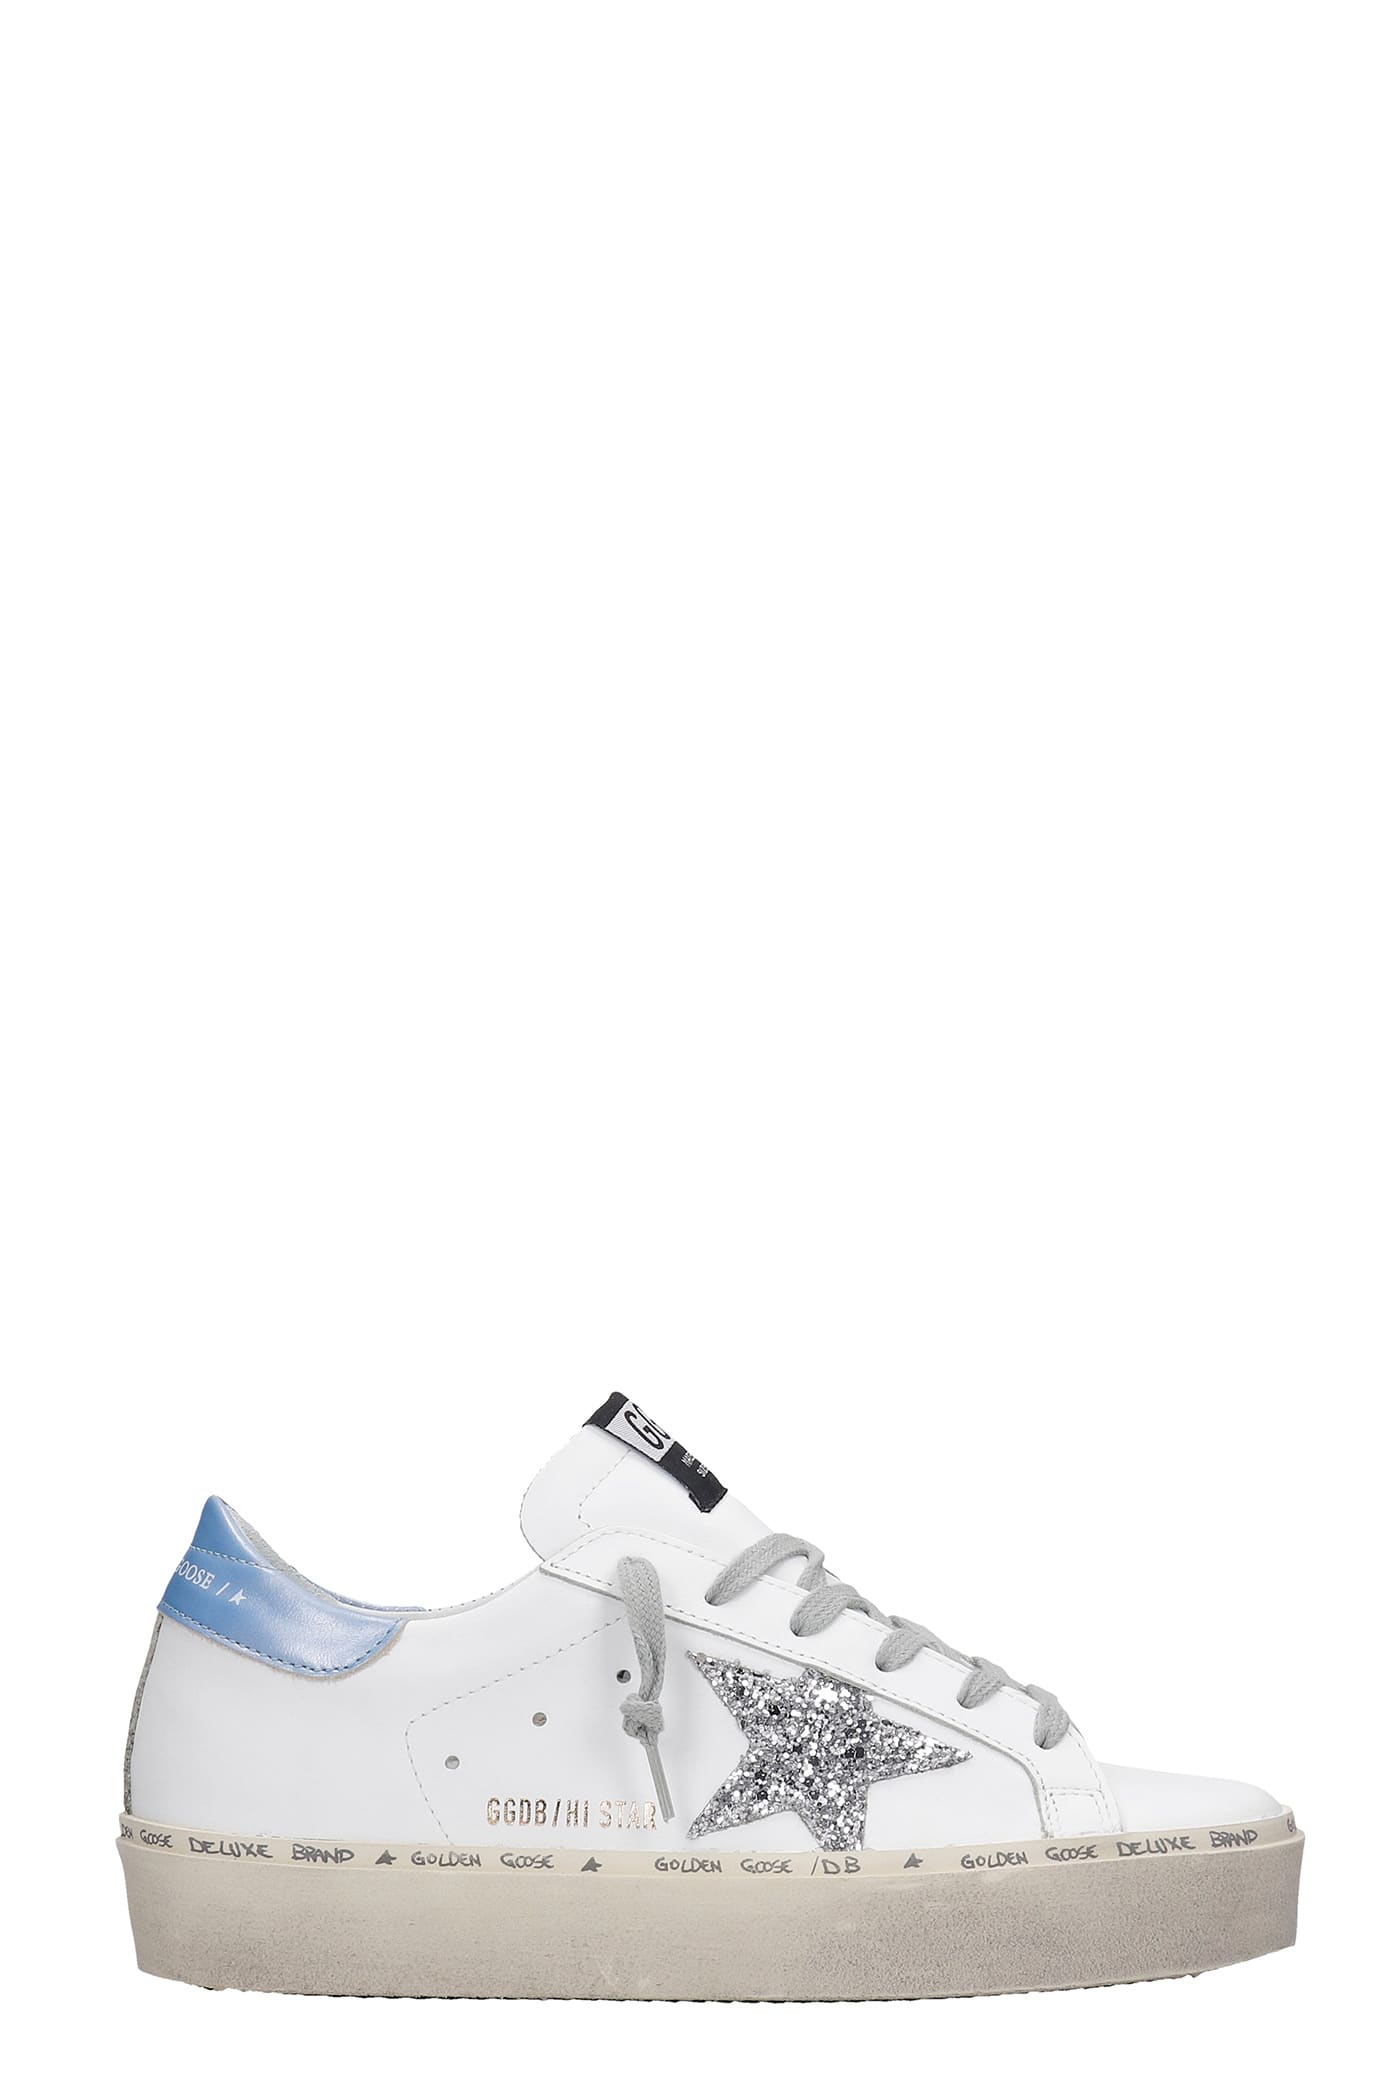 GOLDEN GOOSE HI STAR SNEAKERS IN WHITE LEATHER,GWF00118F00021410245